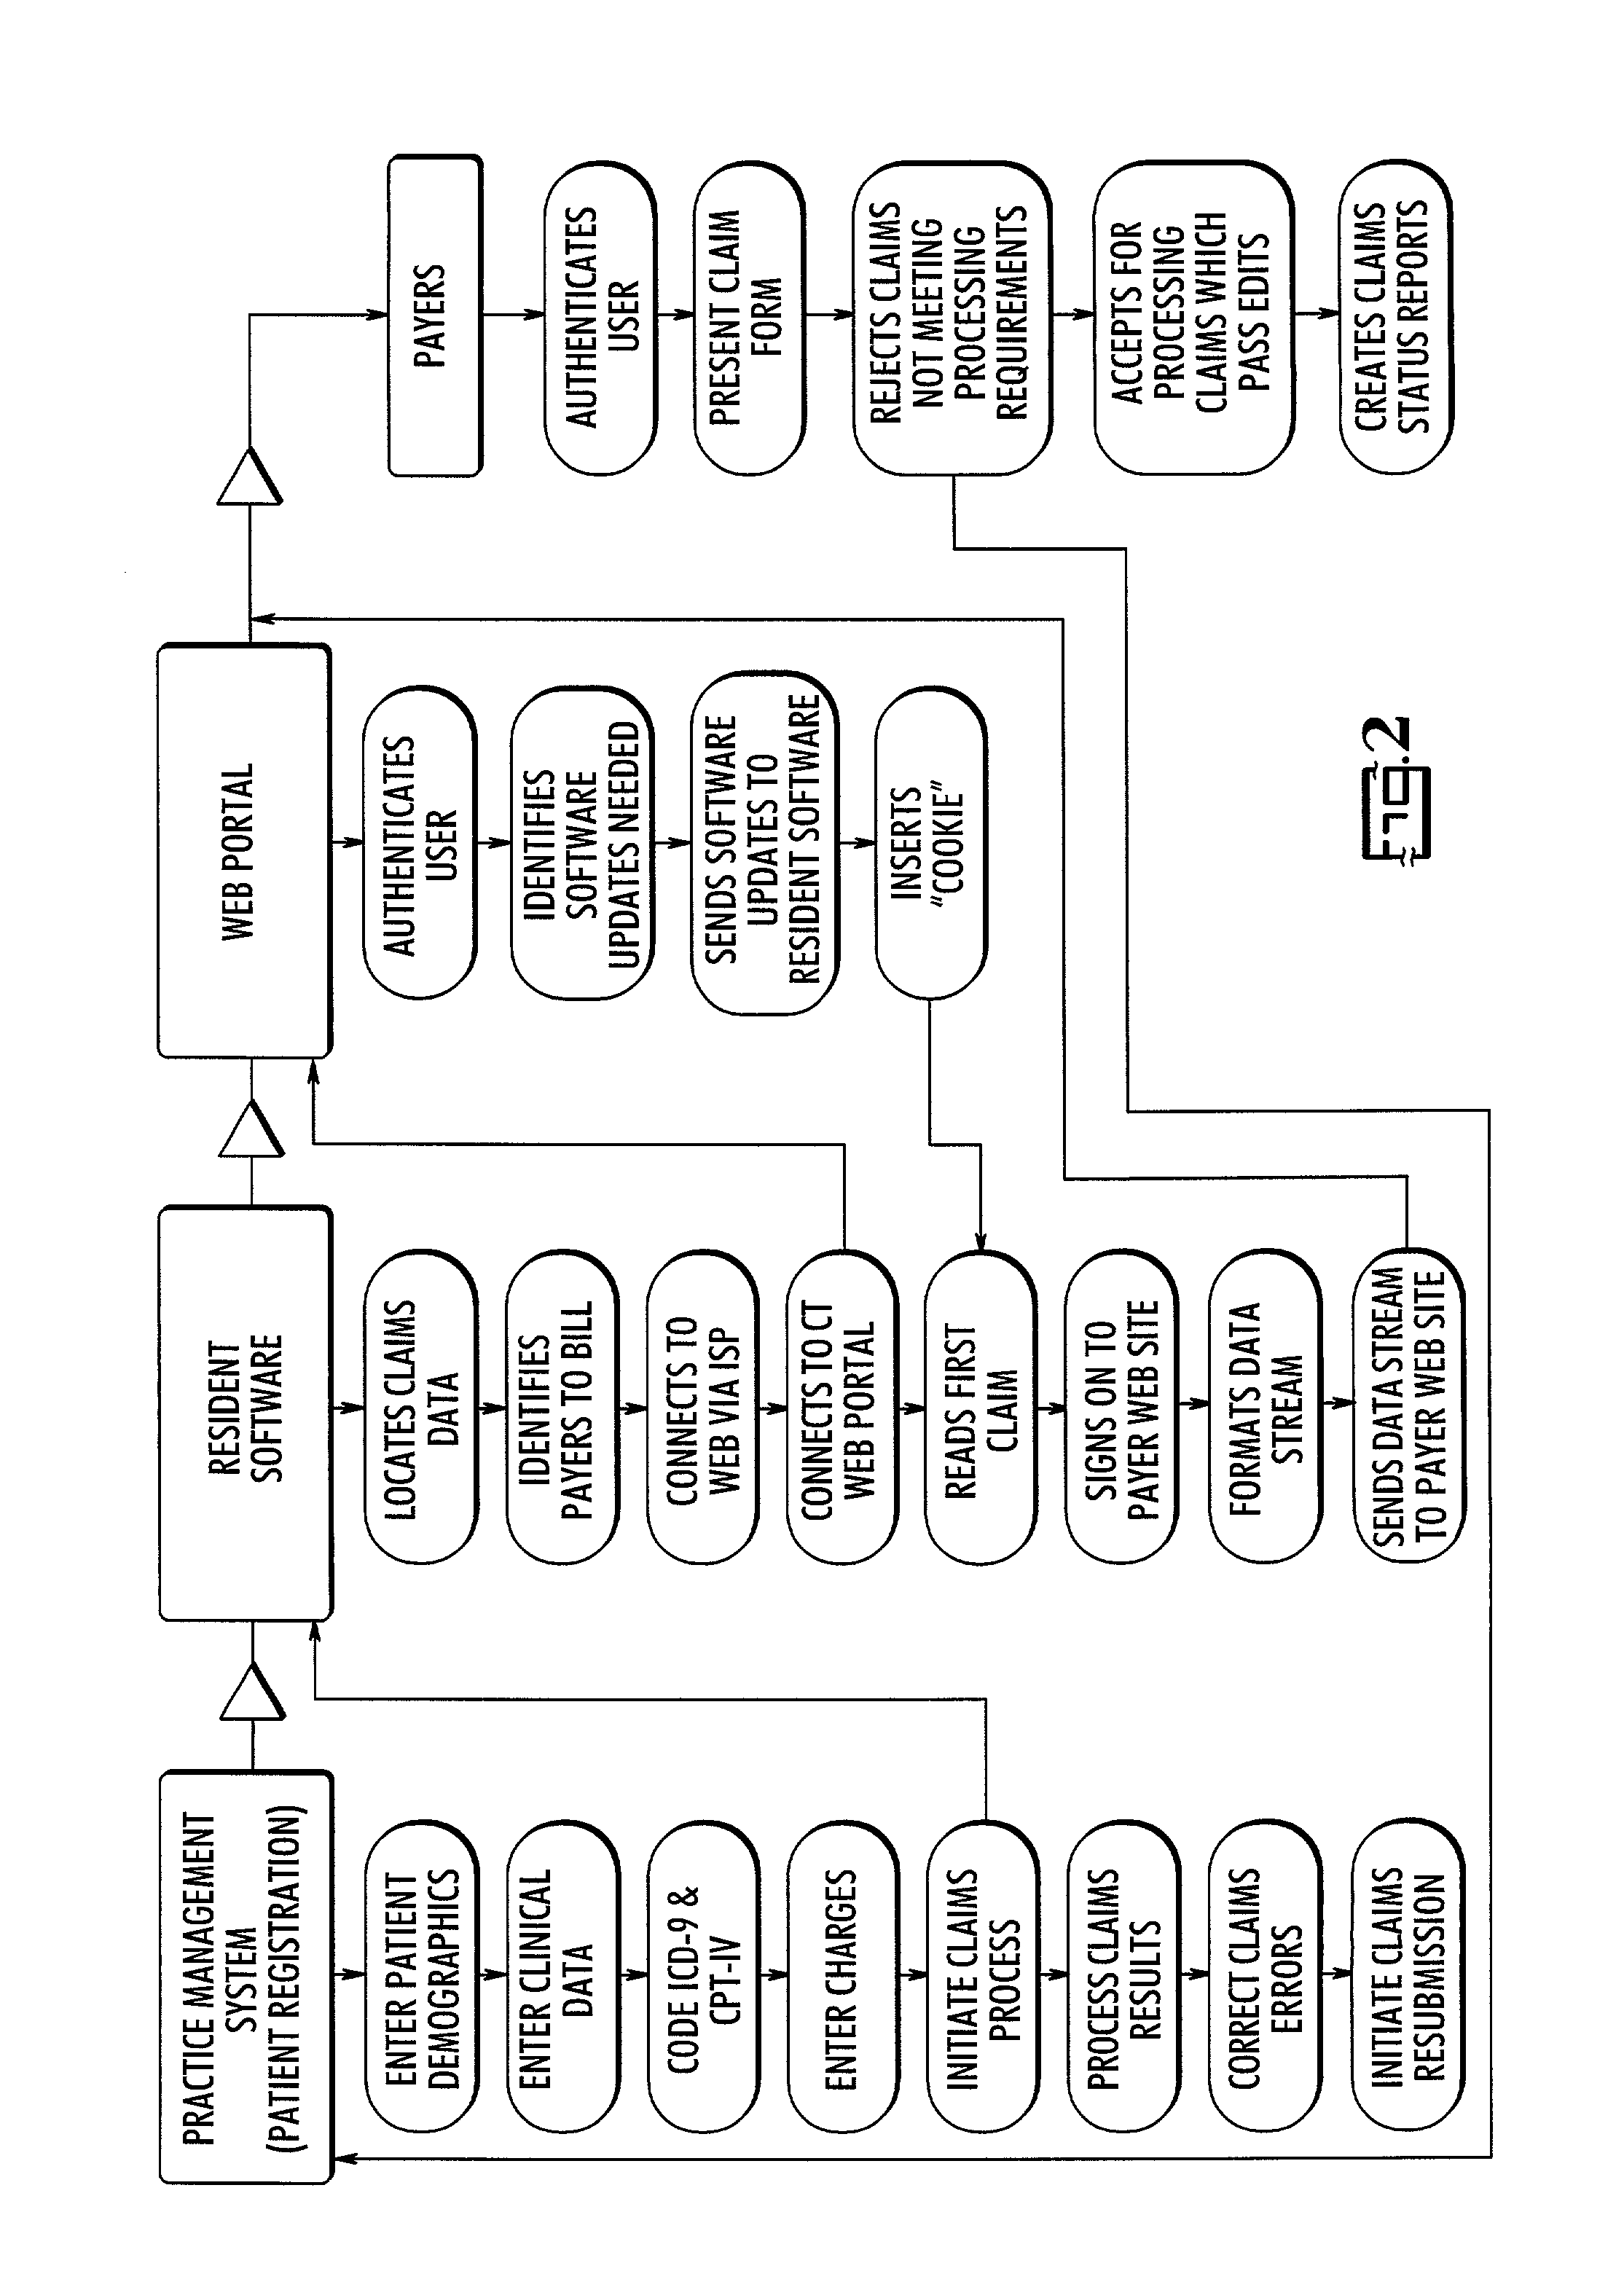 Insurance claim filing system and method